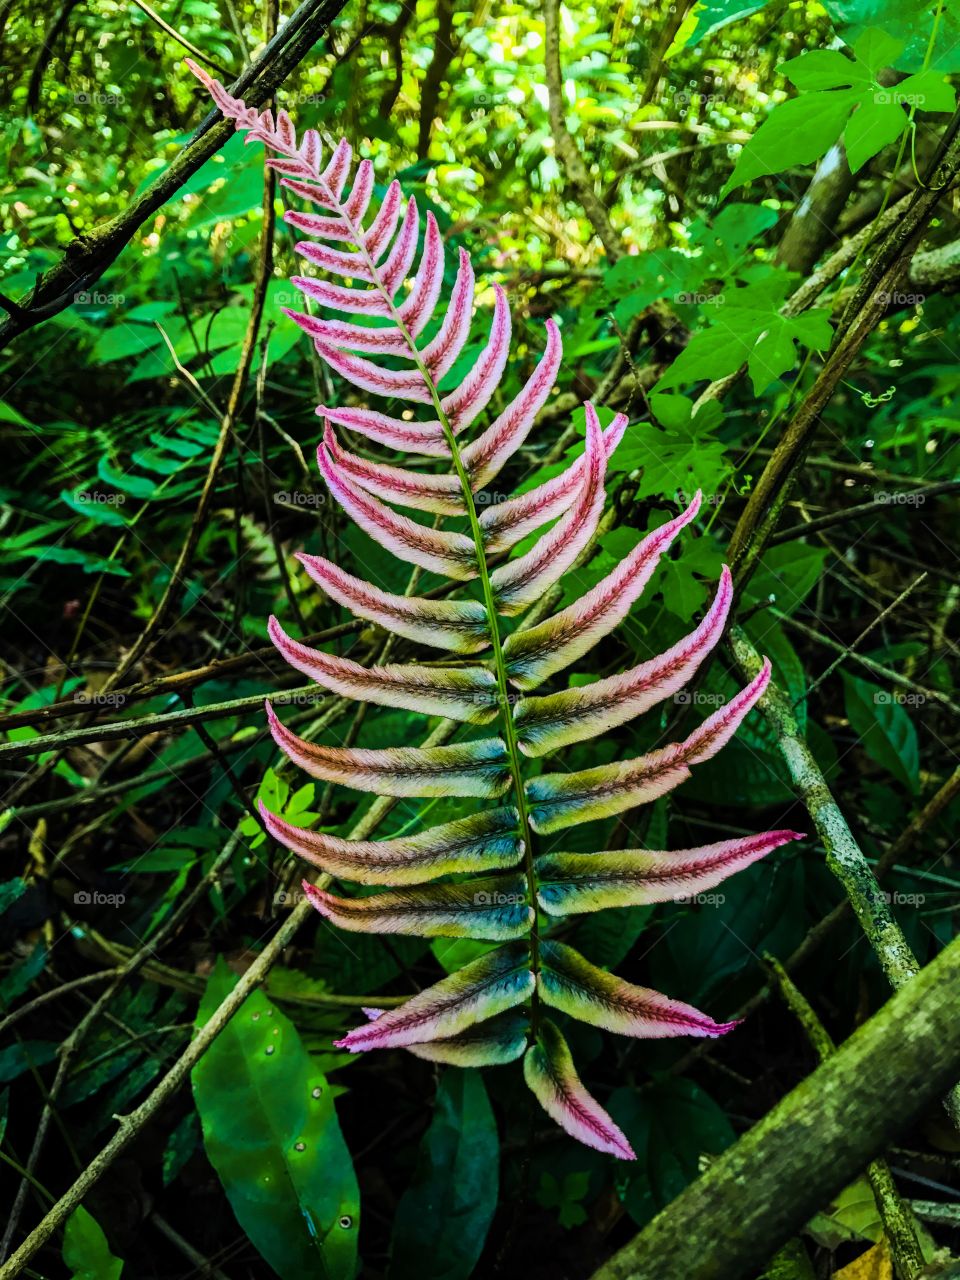 Multicolored fern that captures everyone’s attention!